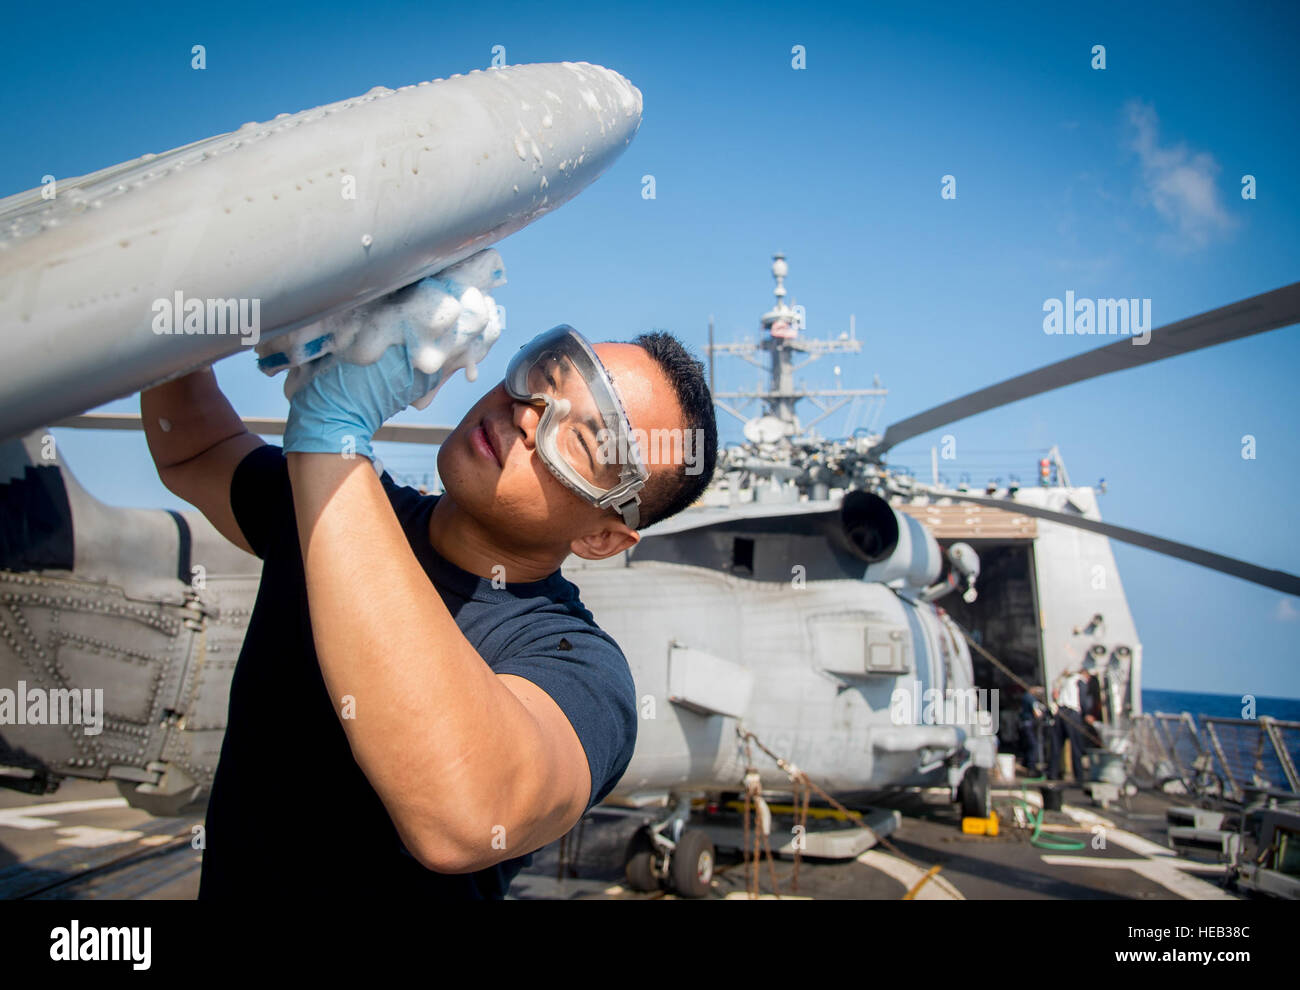 160201-N-MJ645-095   PACIFIC OCEAN (Feb. 01, 2016) Personnel Specialist 1st Class Renz E. Bismonte washes an MH-60R Sea Hawk helicopter of the Easy Riders of Helicopter Maritime Squadron (HSM) 37 aboard the guided-missile destroyer USS Chung-Hoon (DDG 93). Providing a combat-ready force to protect collective maritime interests, Chung-Hoon, assigned to the Stennis strike group, is operating as part of the Great Green Fleet on a regularly scheduled Western Pacific deployment.  Mass Communication Specialist 2nd Class Marcus L. Stanley Stock Photo